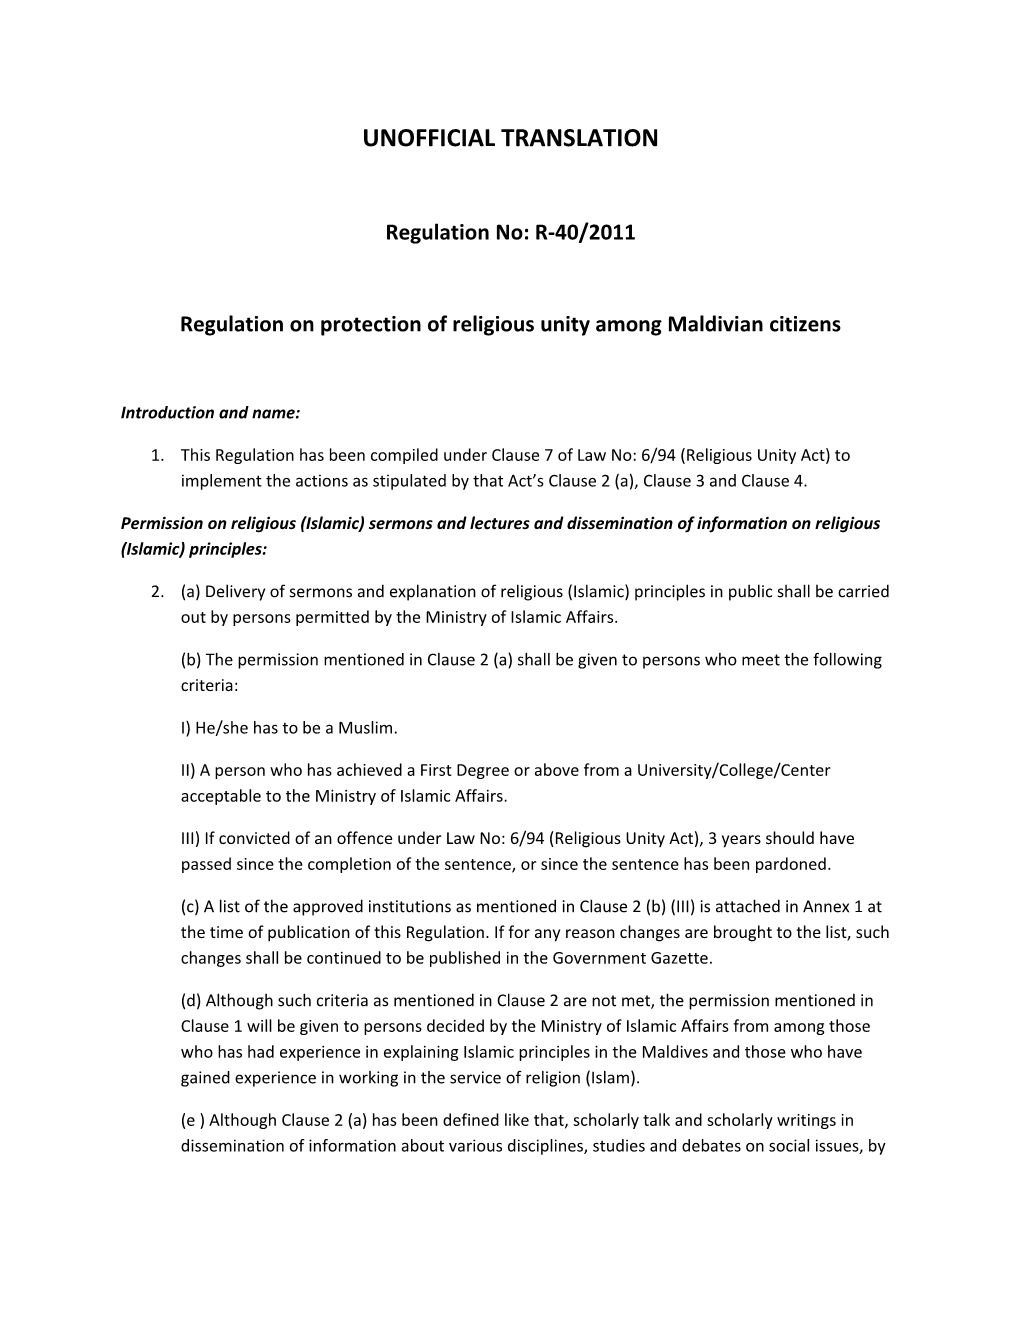 Regulation on Protection of Religious Unity Among Maldivian Citizens